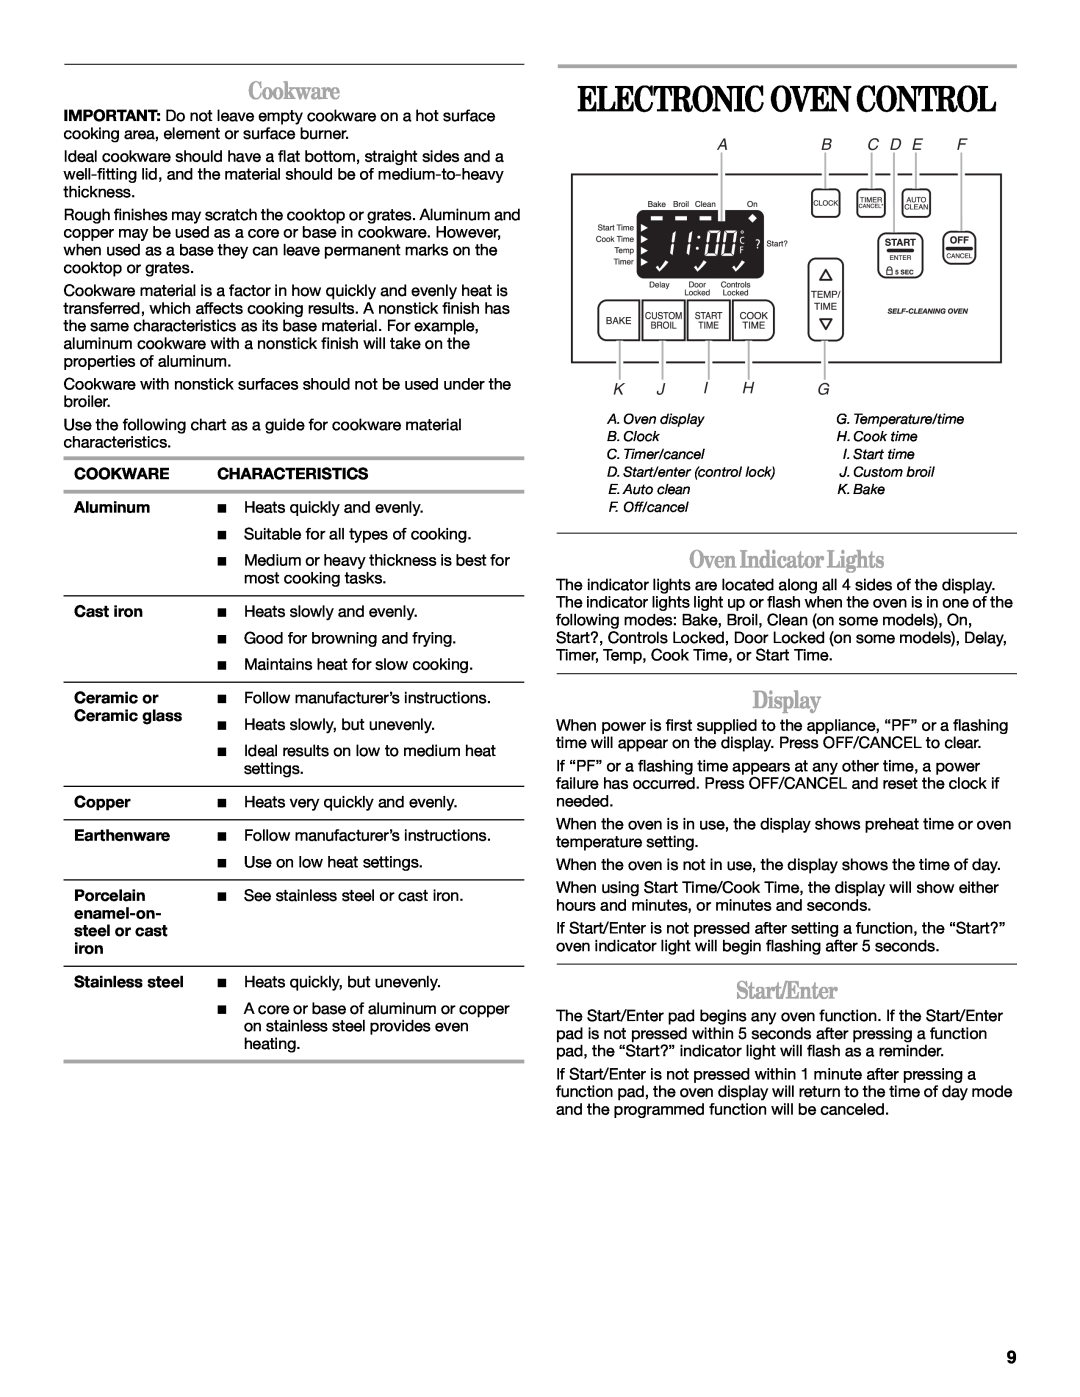 Whirlpool IES355RQ2 manual Cookware, Oven Indicator Lights, Display, Start/Enter, Electronic Oven Control, Ab C D E F 